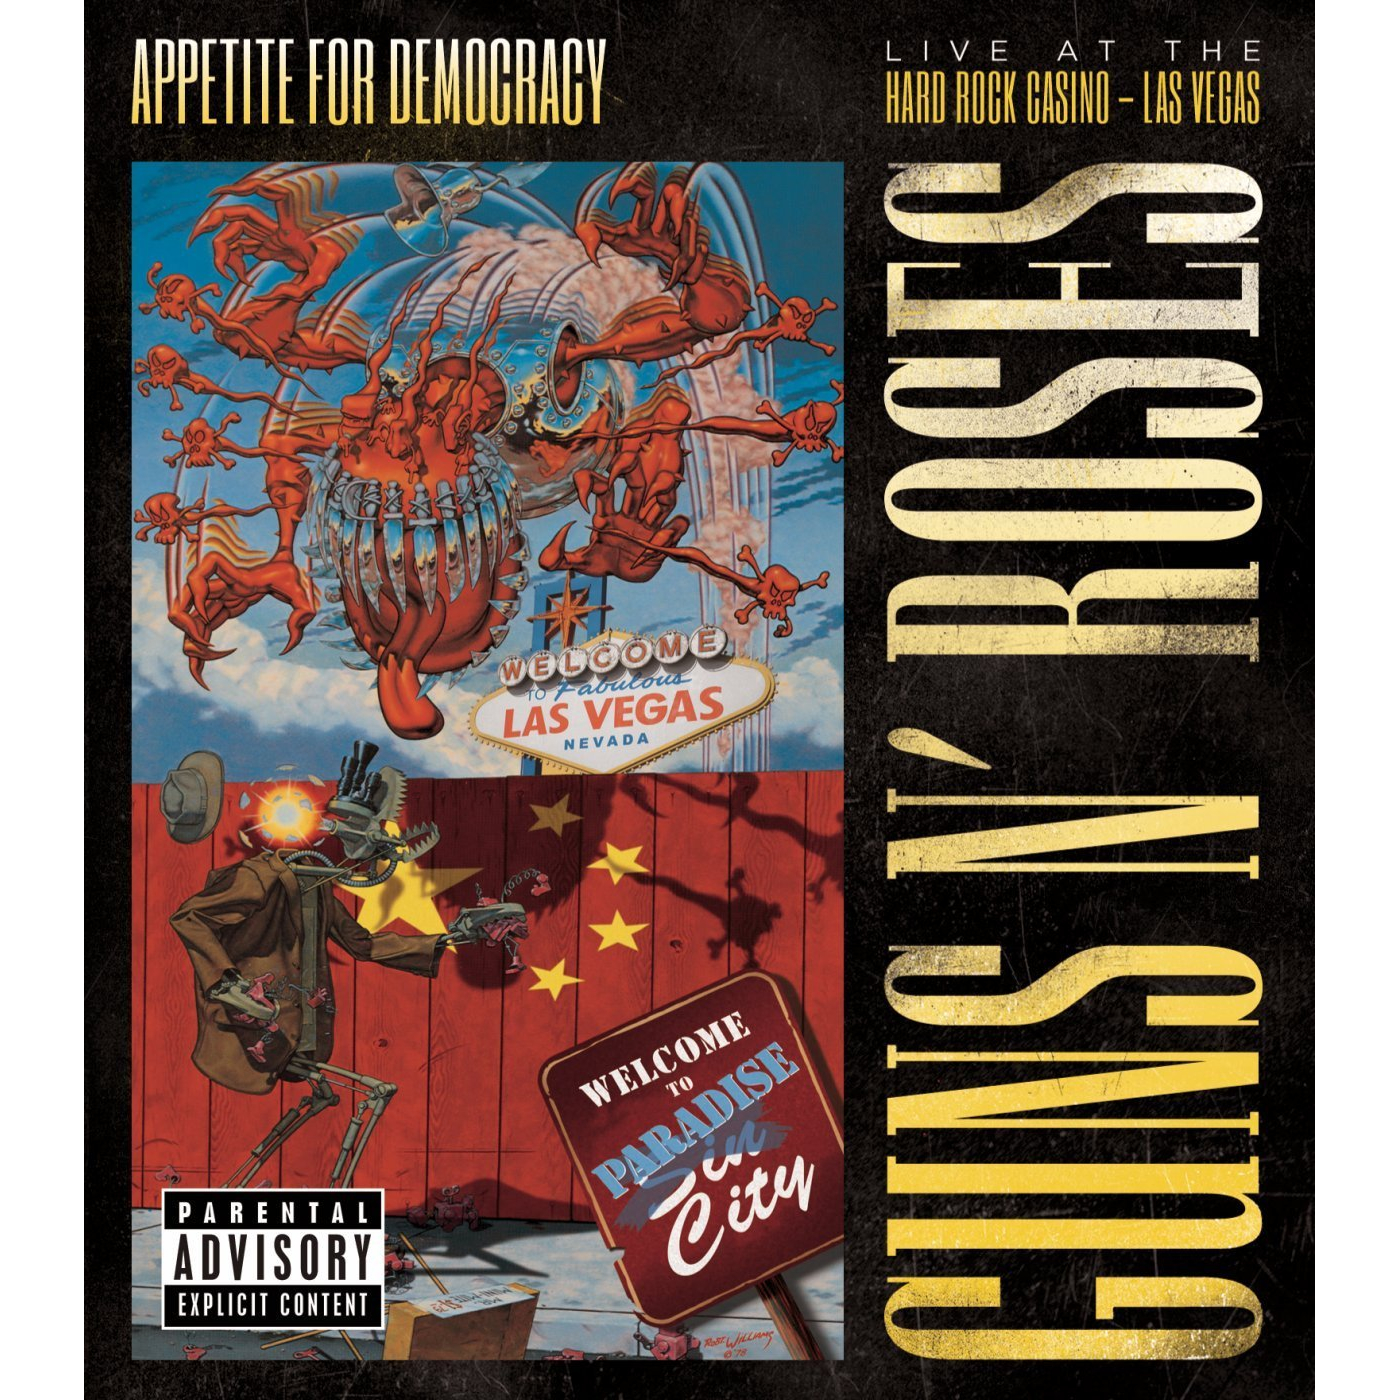 APPETITE FOR DEMOCRACY: LIVE AT THE HARD ROCK CASINO - LAS VEGAS